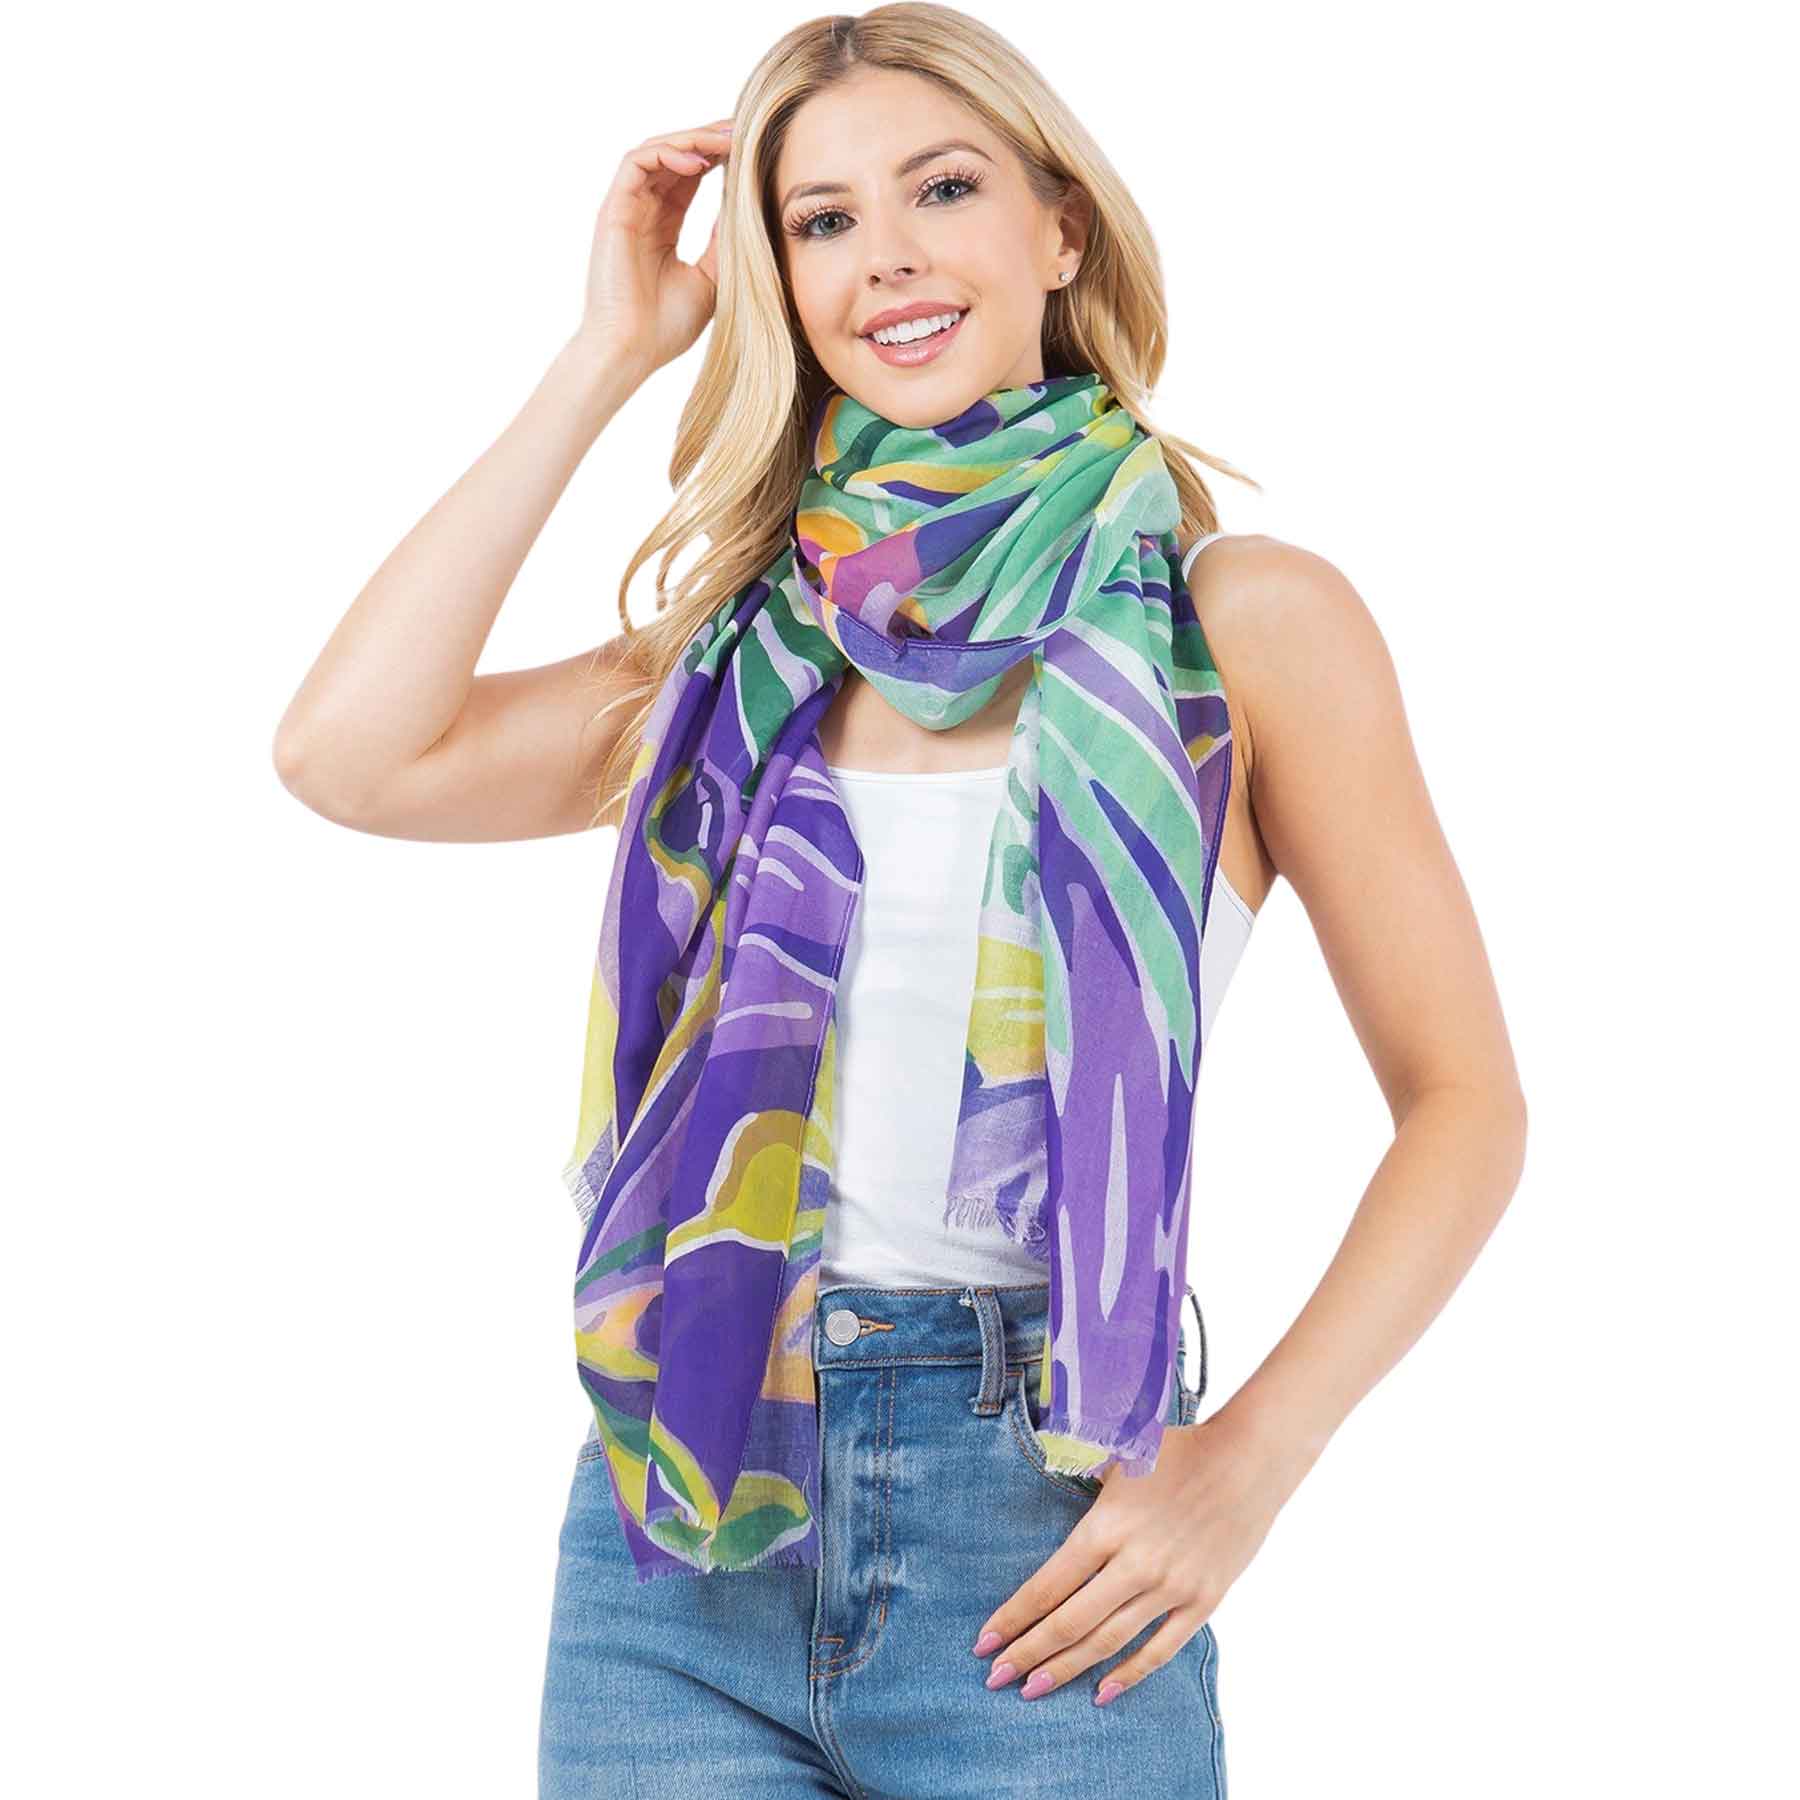 4281-01
Abstract Pattern Scarf